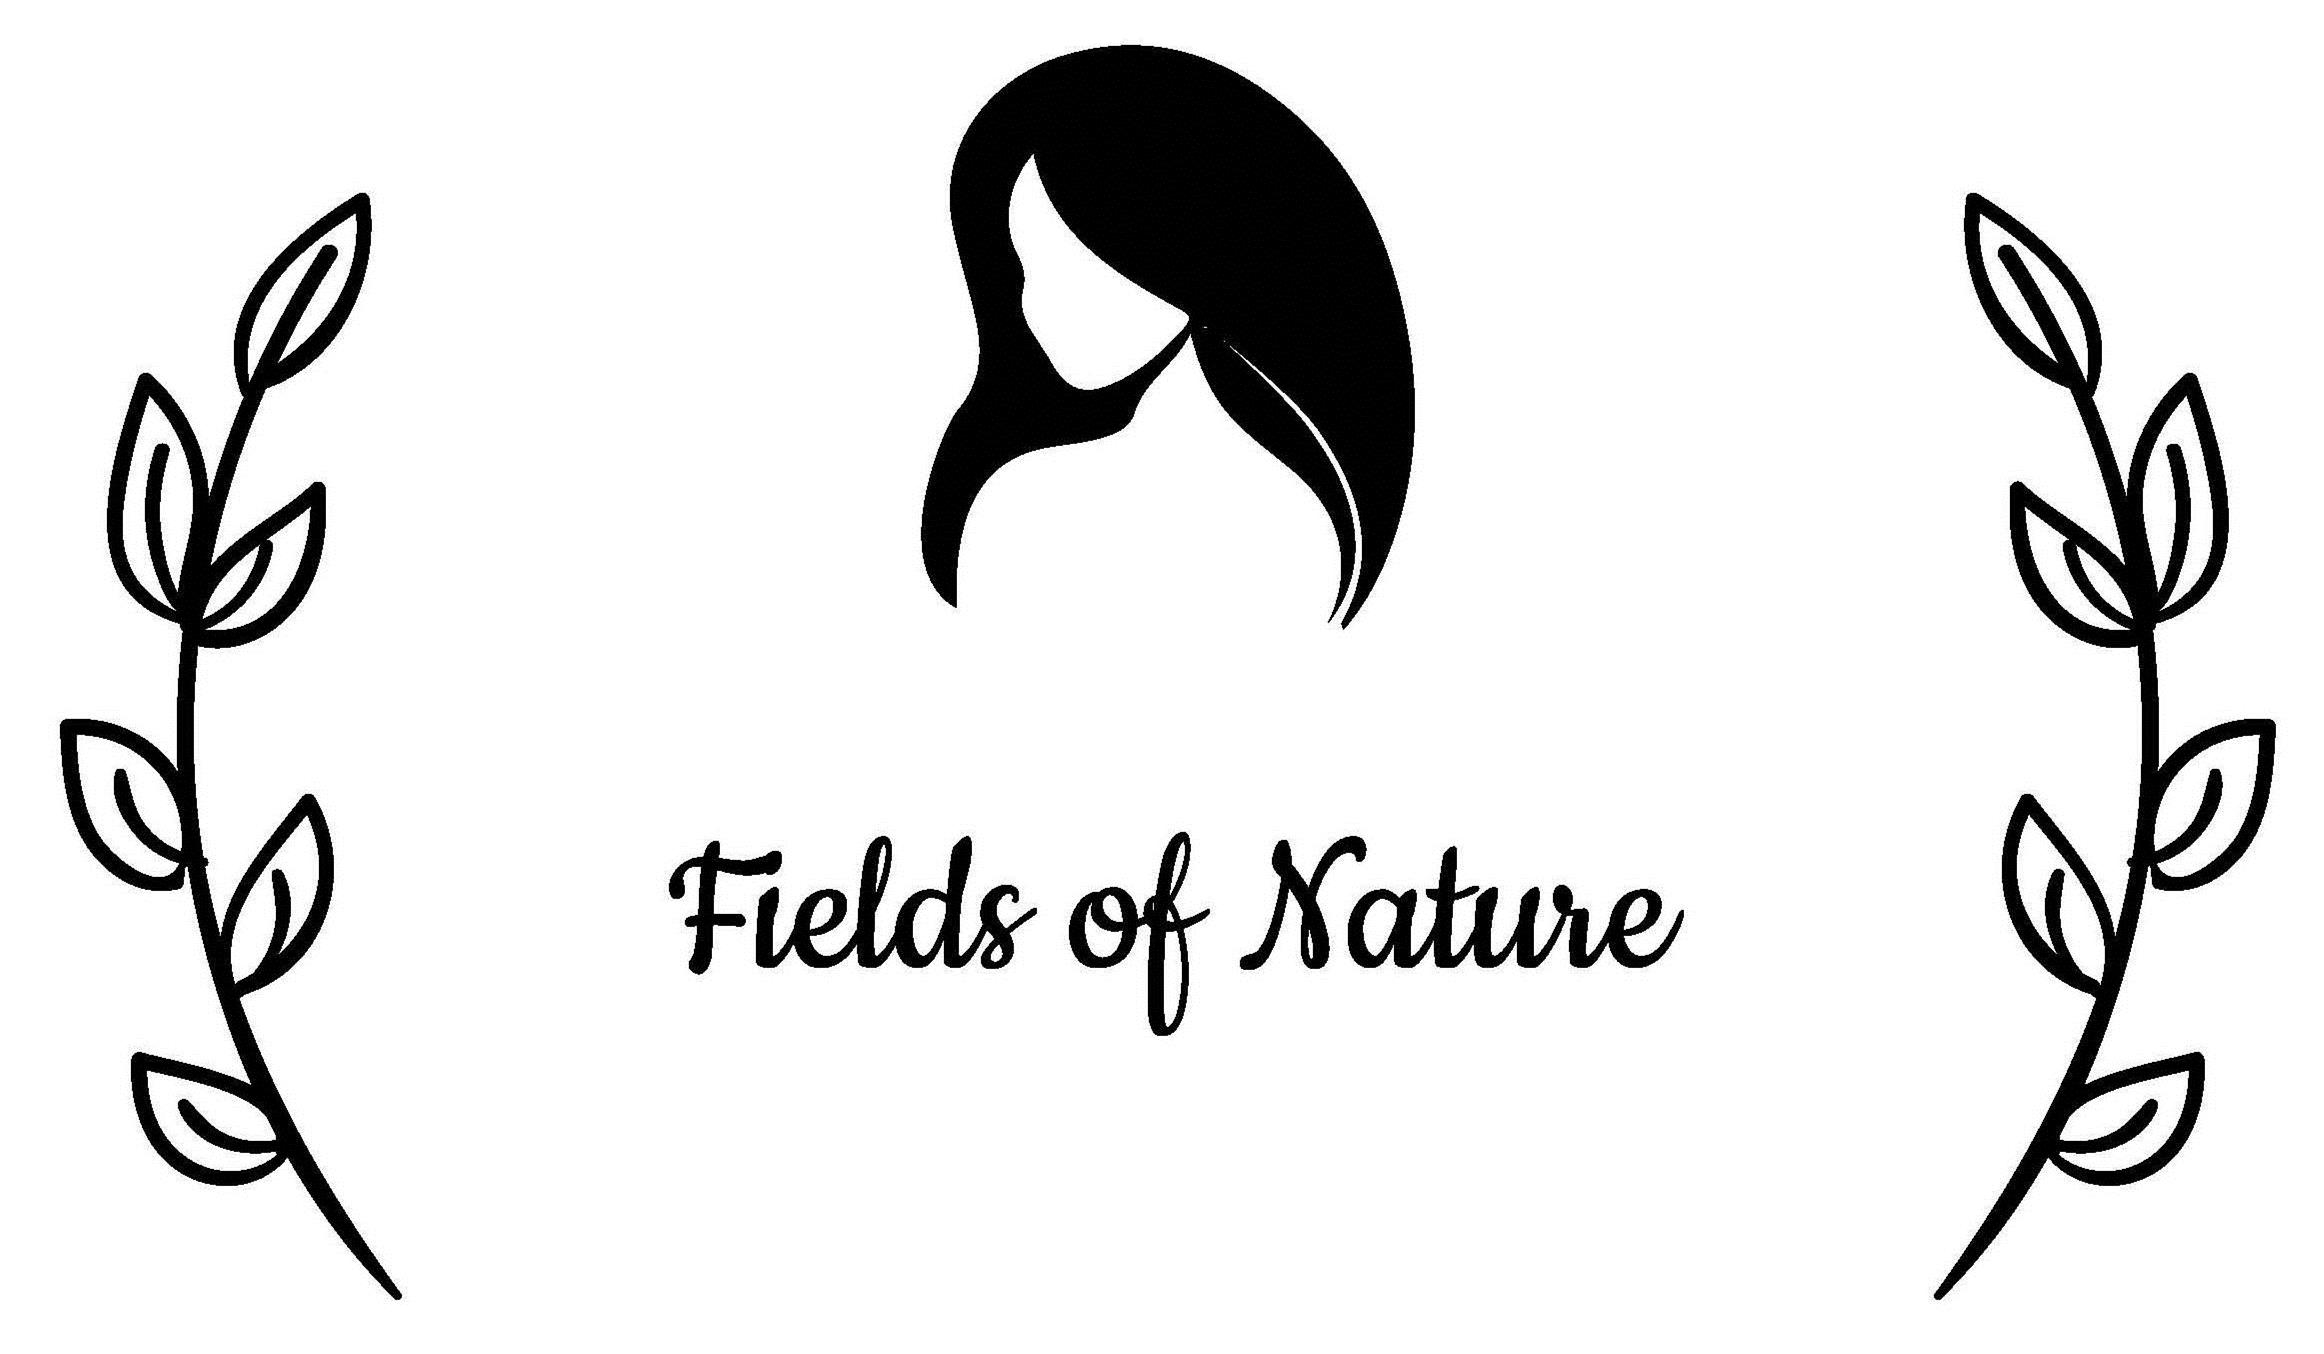 FIELDS OF NATURE